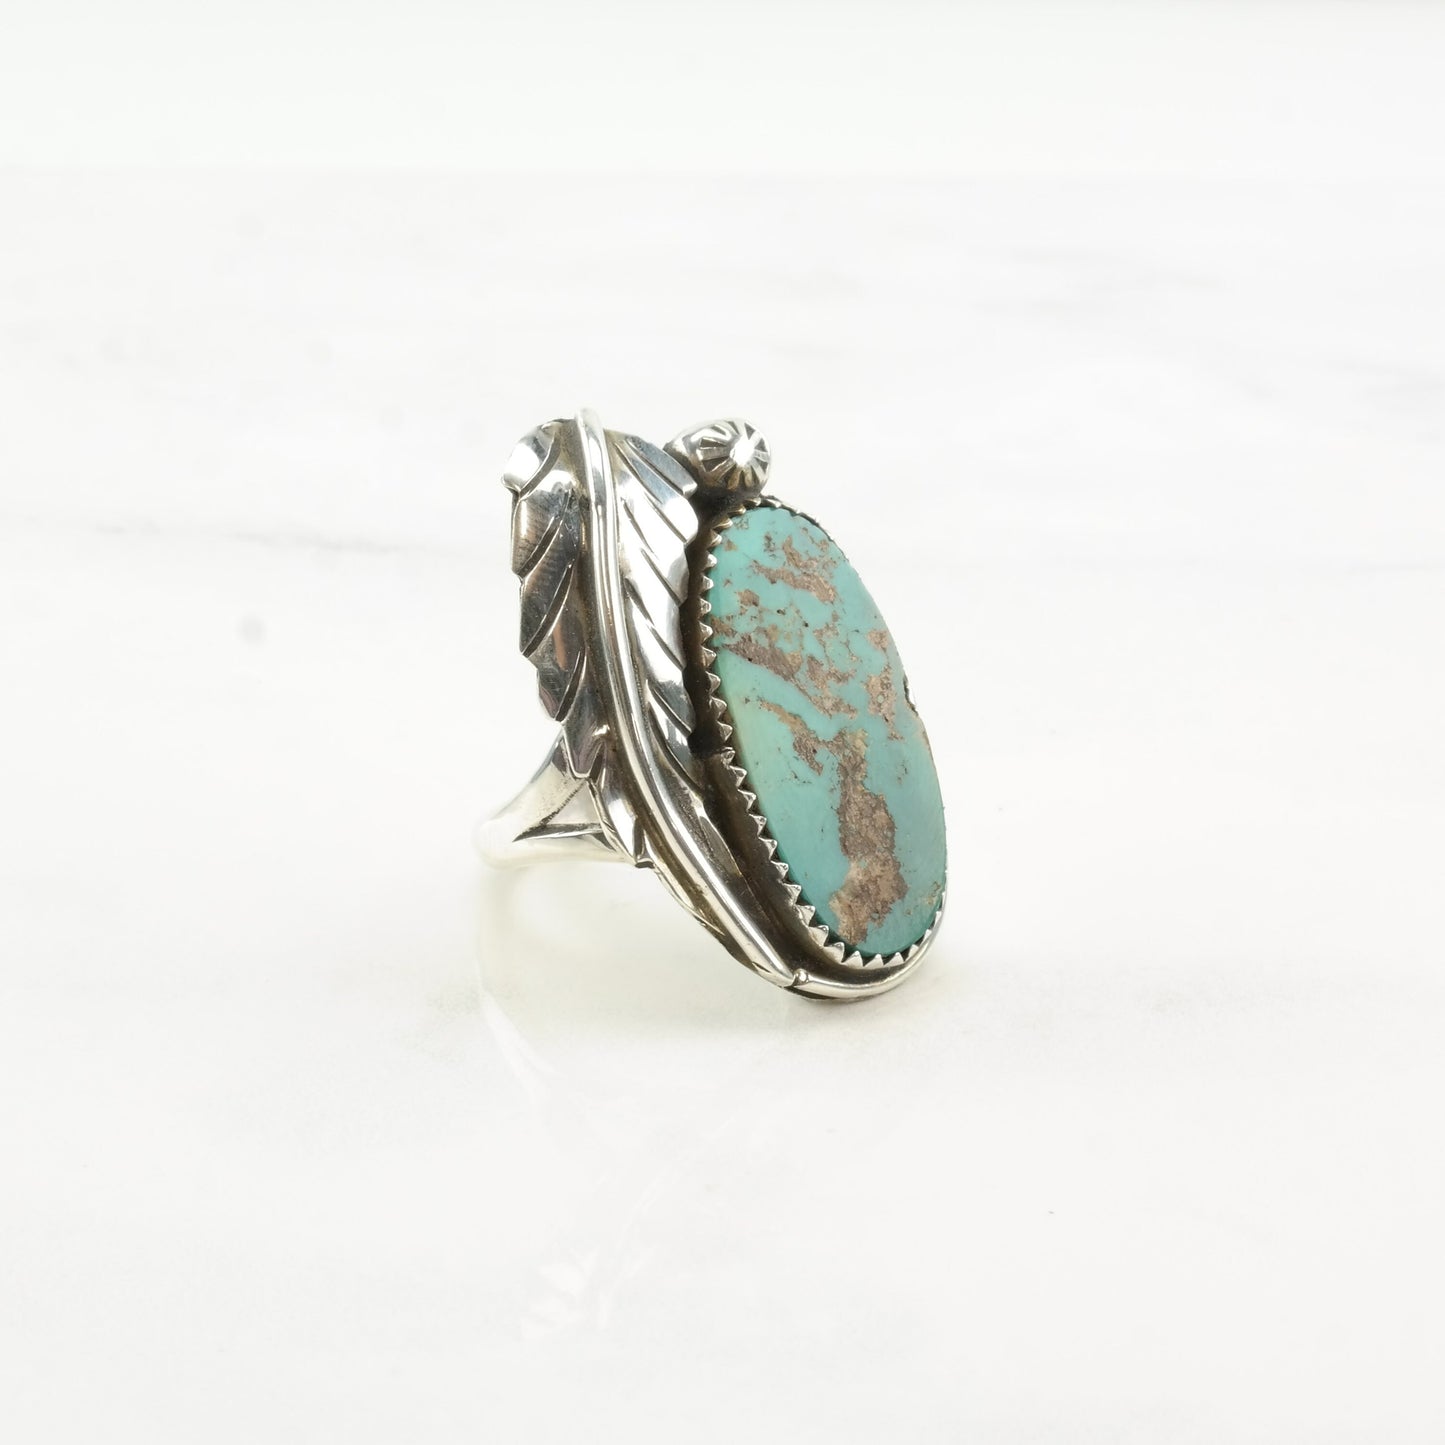 Vintage Native American Silver Ring Royston Turquoise Leaf Flower Sterling Size 7 3/4